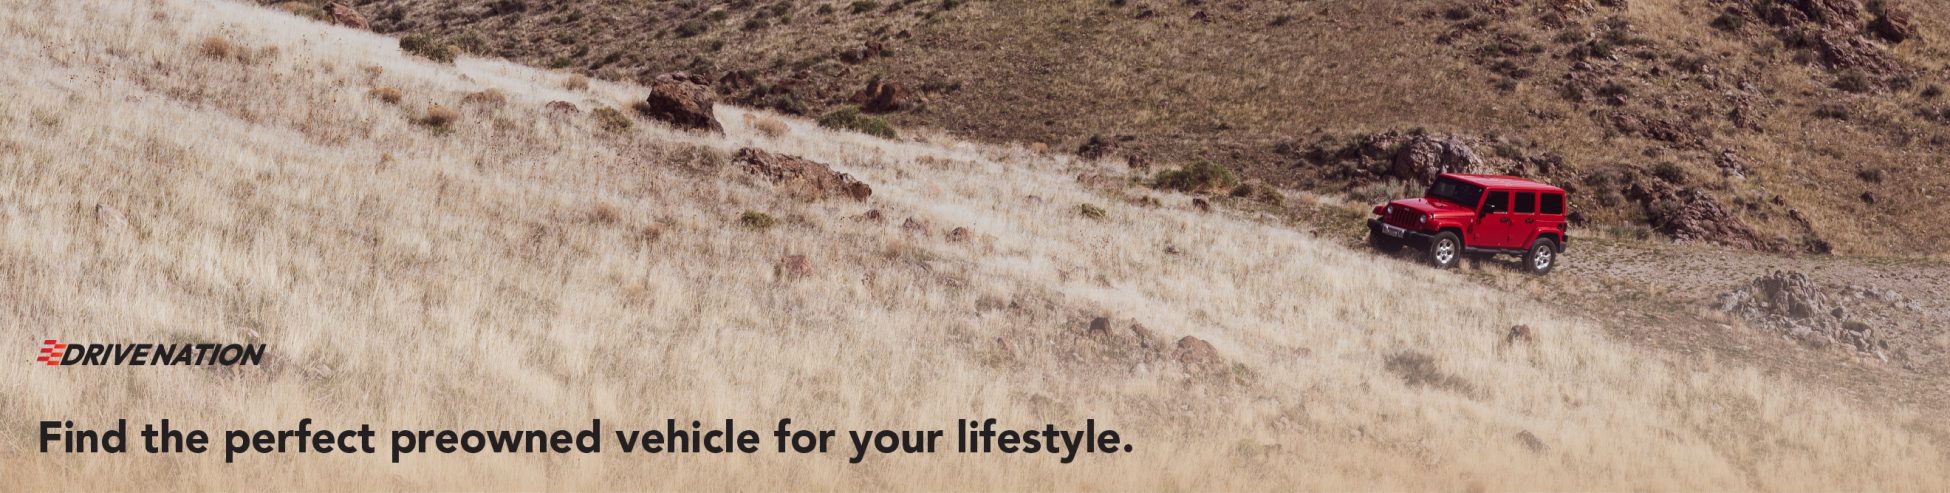 Picture of a red 8th gen Jeep Wrangler off-roading on a hill with a caption that states 